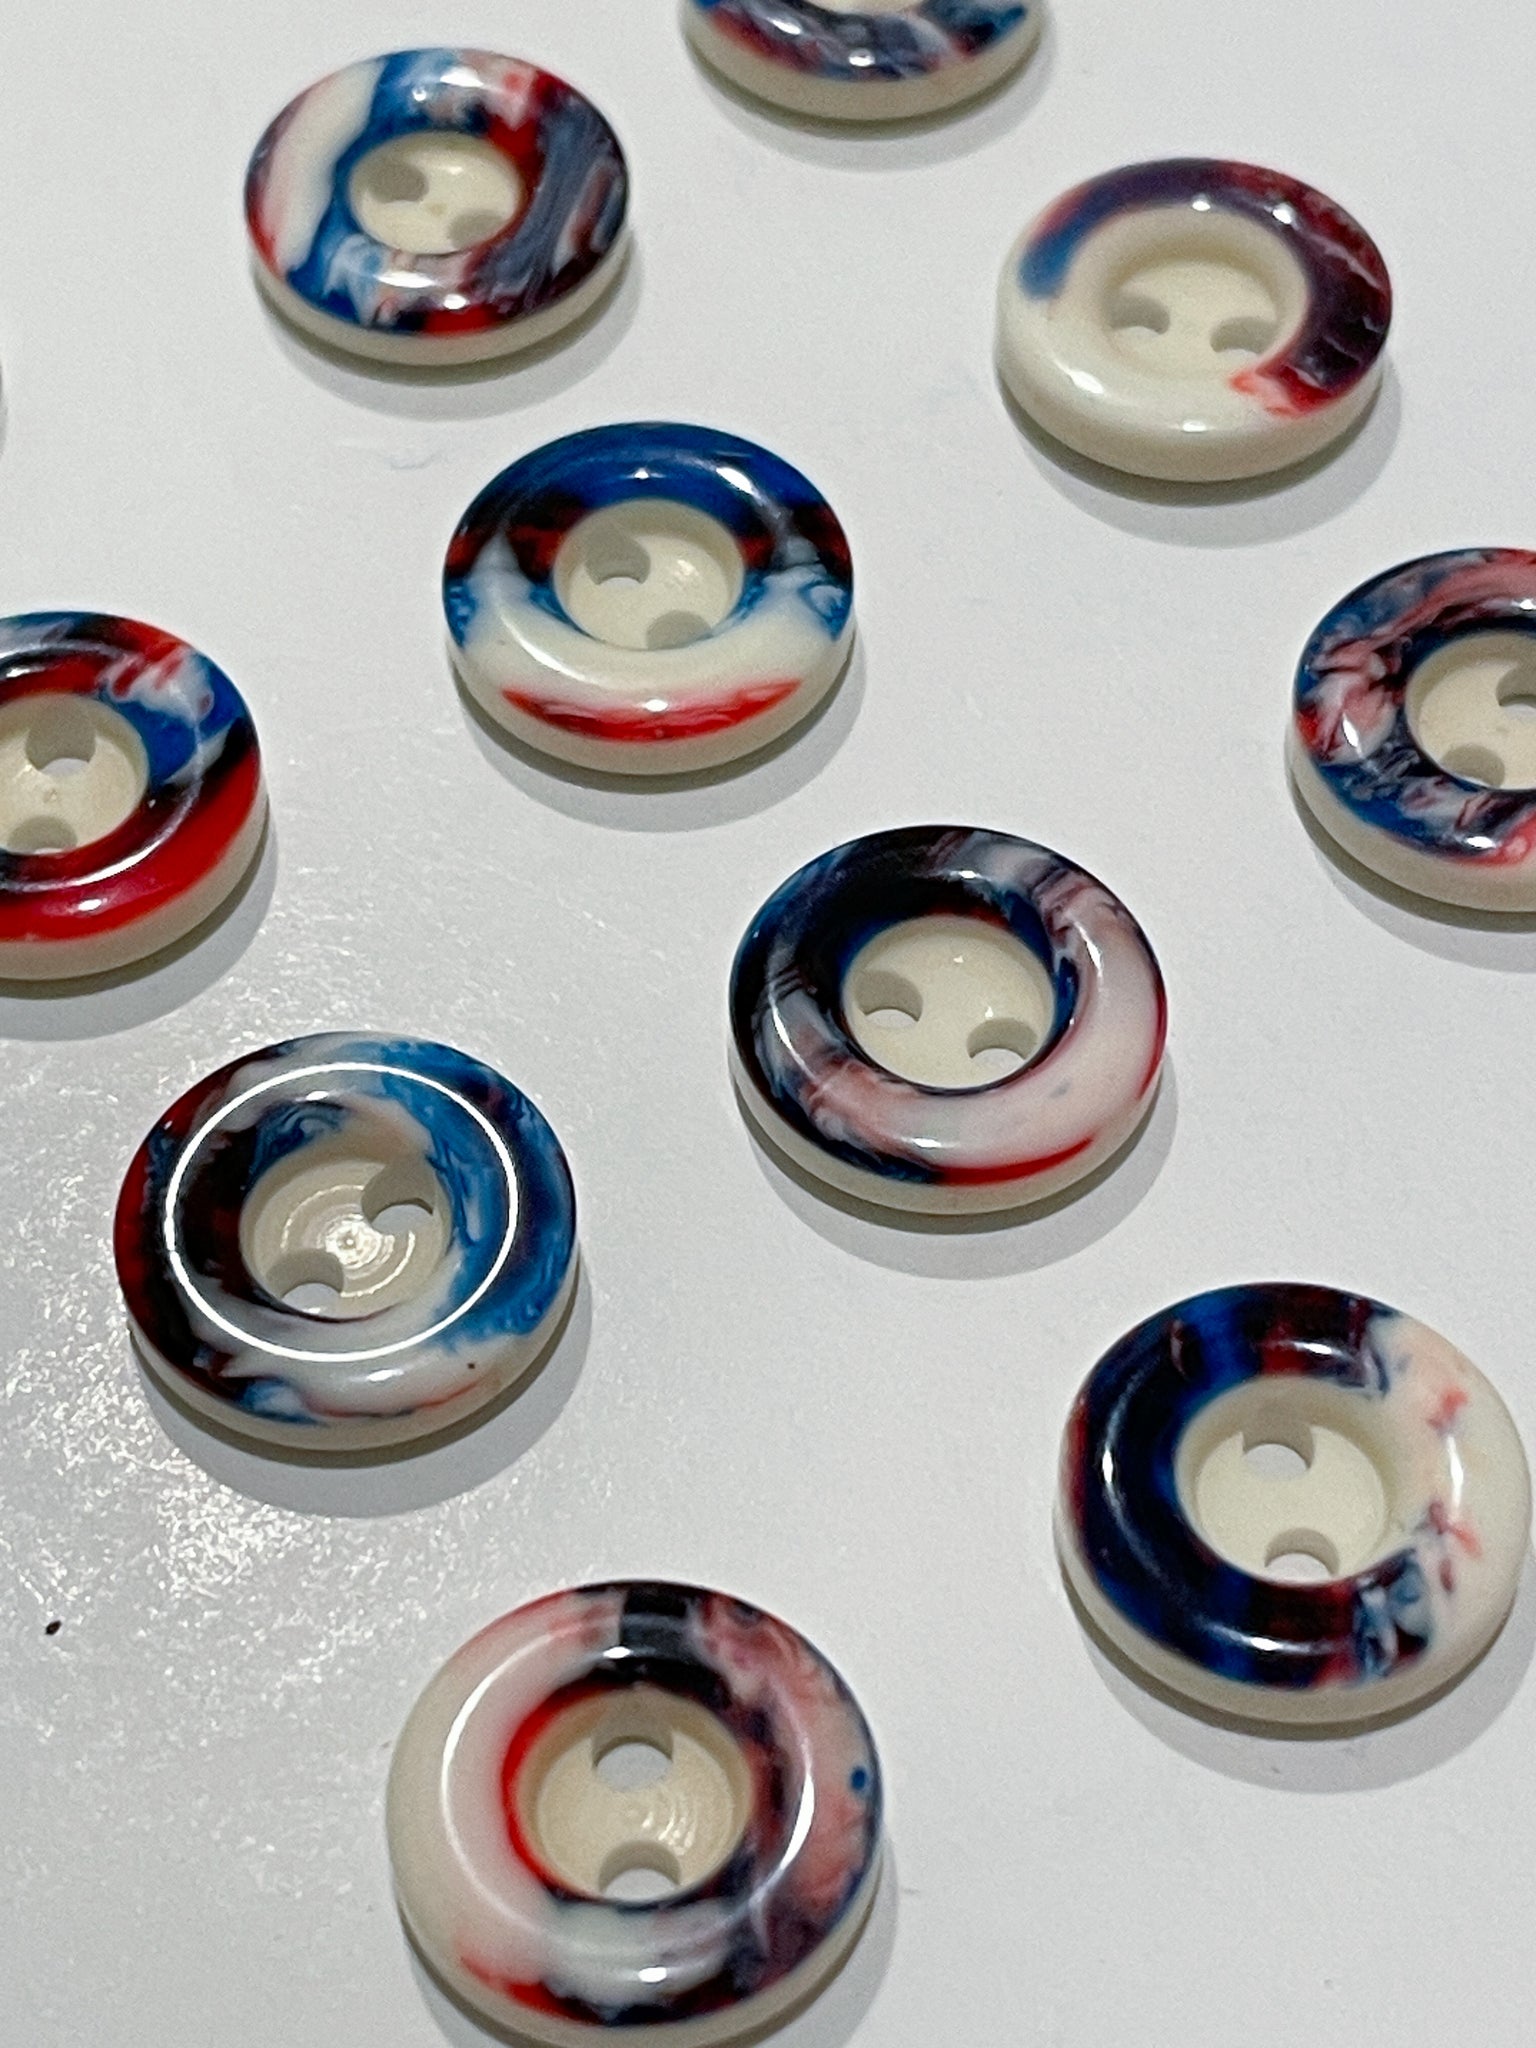 Buttons Plastic Set of 5 or 6  - White with Multi Colored Ring